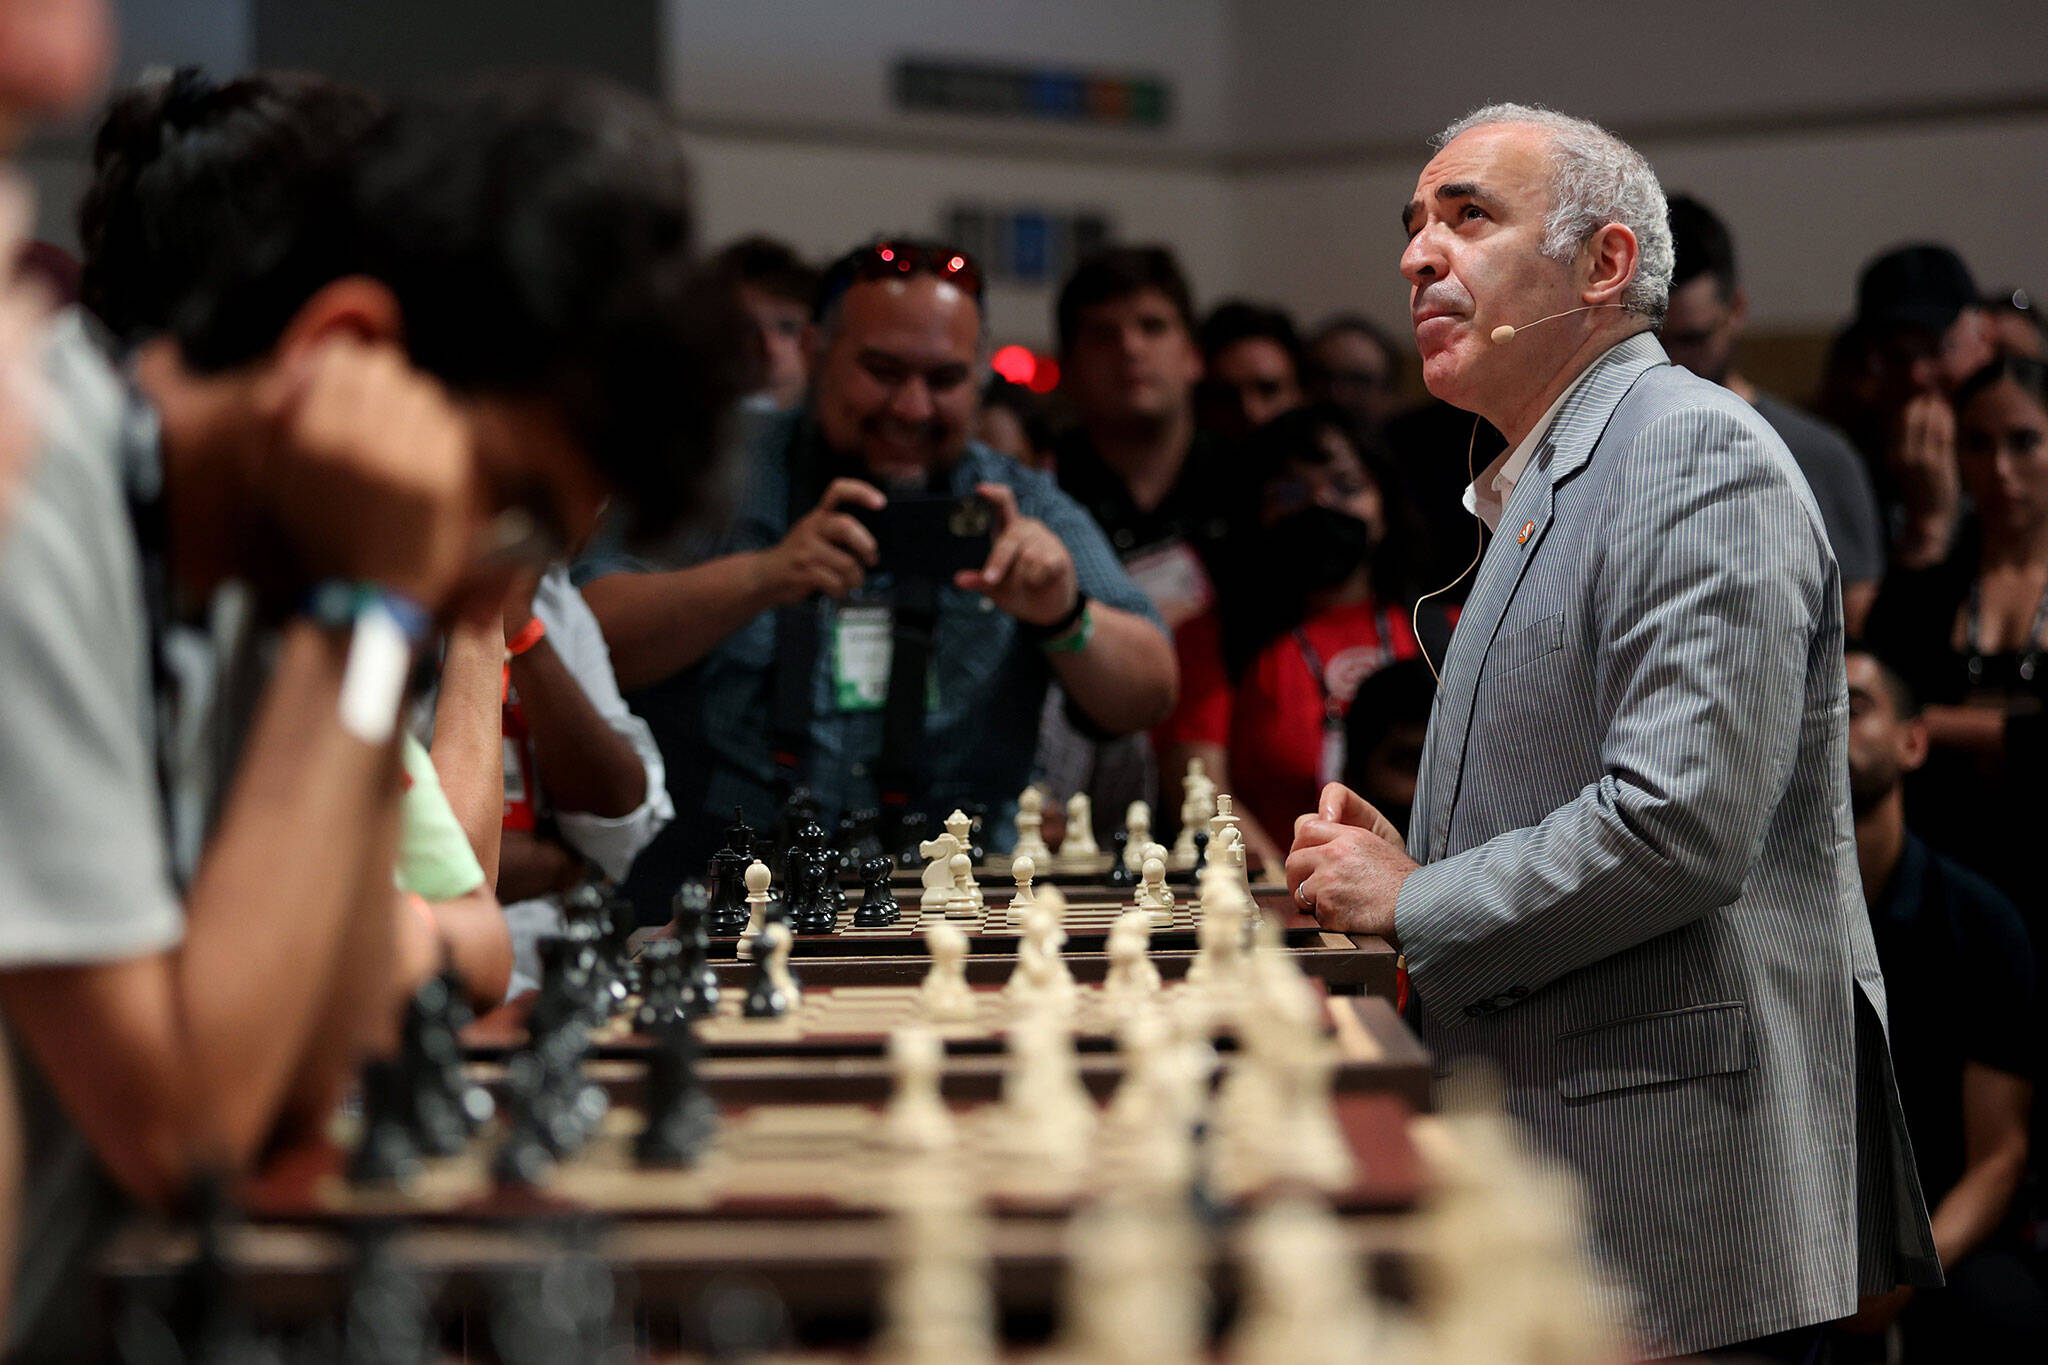 The Greatest Chess Game Of All Time Explained - Kasparov vs